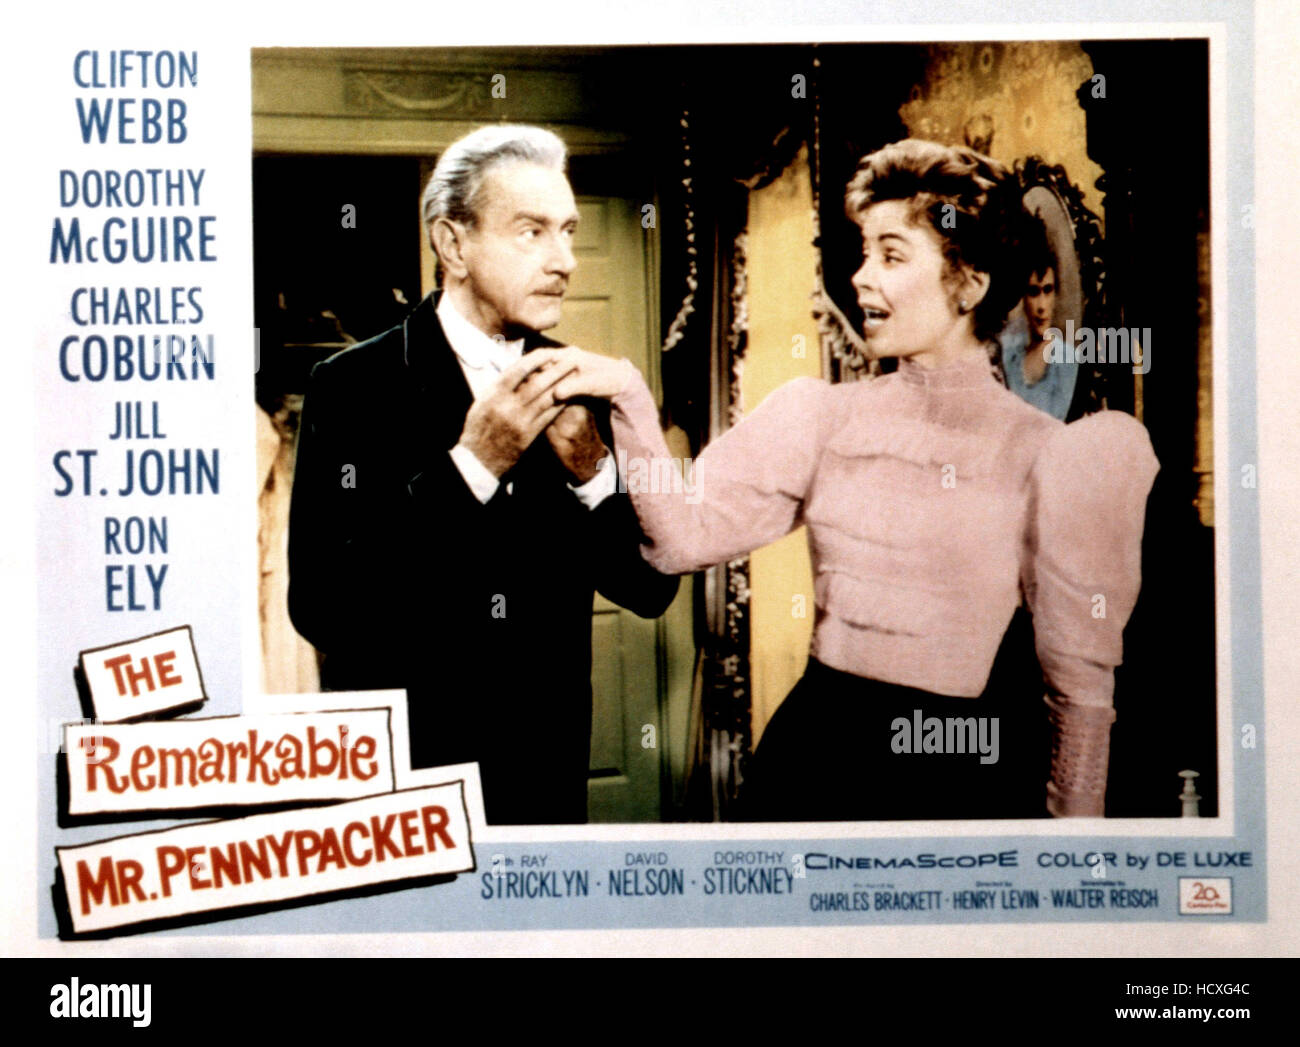 THE REMARKABLE MR. PENNYPACKER, Clifton Webb, Dorothy McGuire, 1959 ...